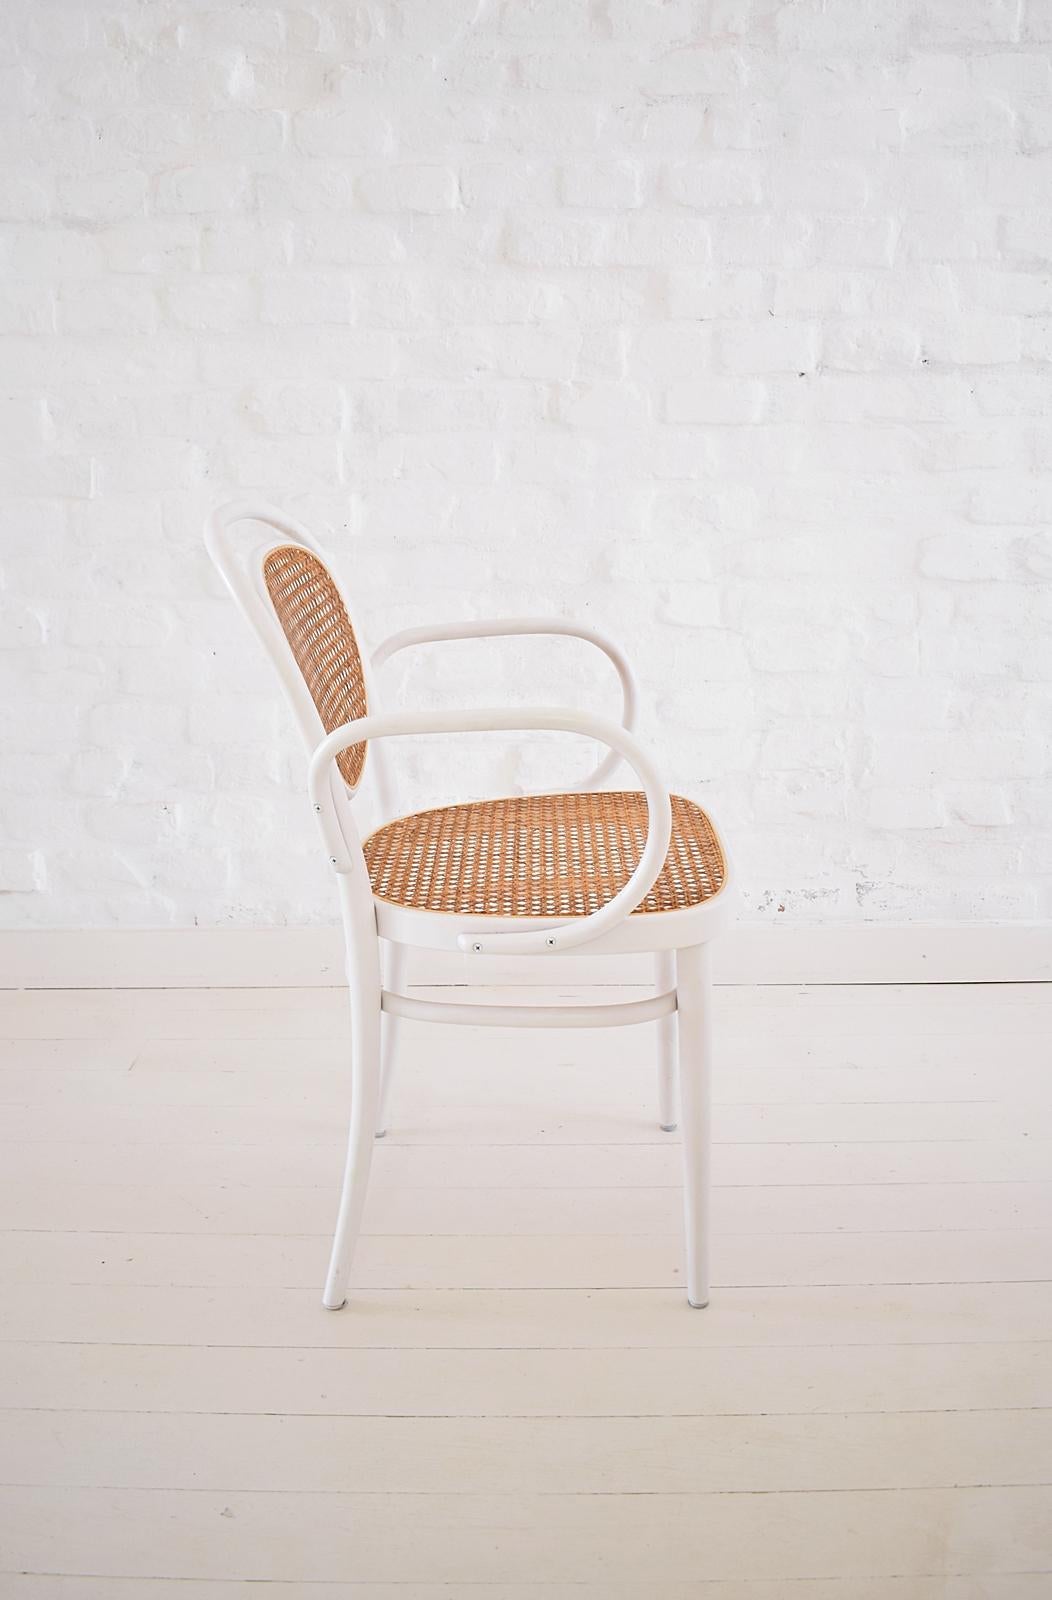 This Thonet no. 215 chair was manufactured 2002 (as marked underneath the seat)
The chair was designed by Michael Thonet in 1859.
It features heat-moulded beech cane seat and back.
  